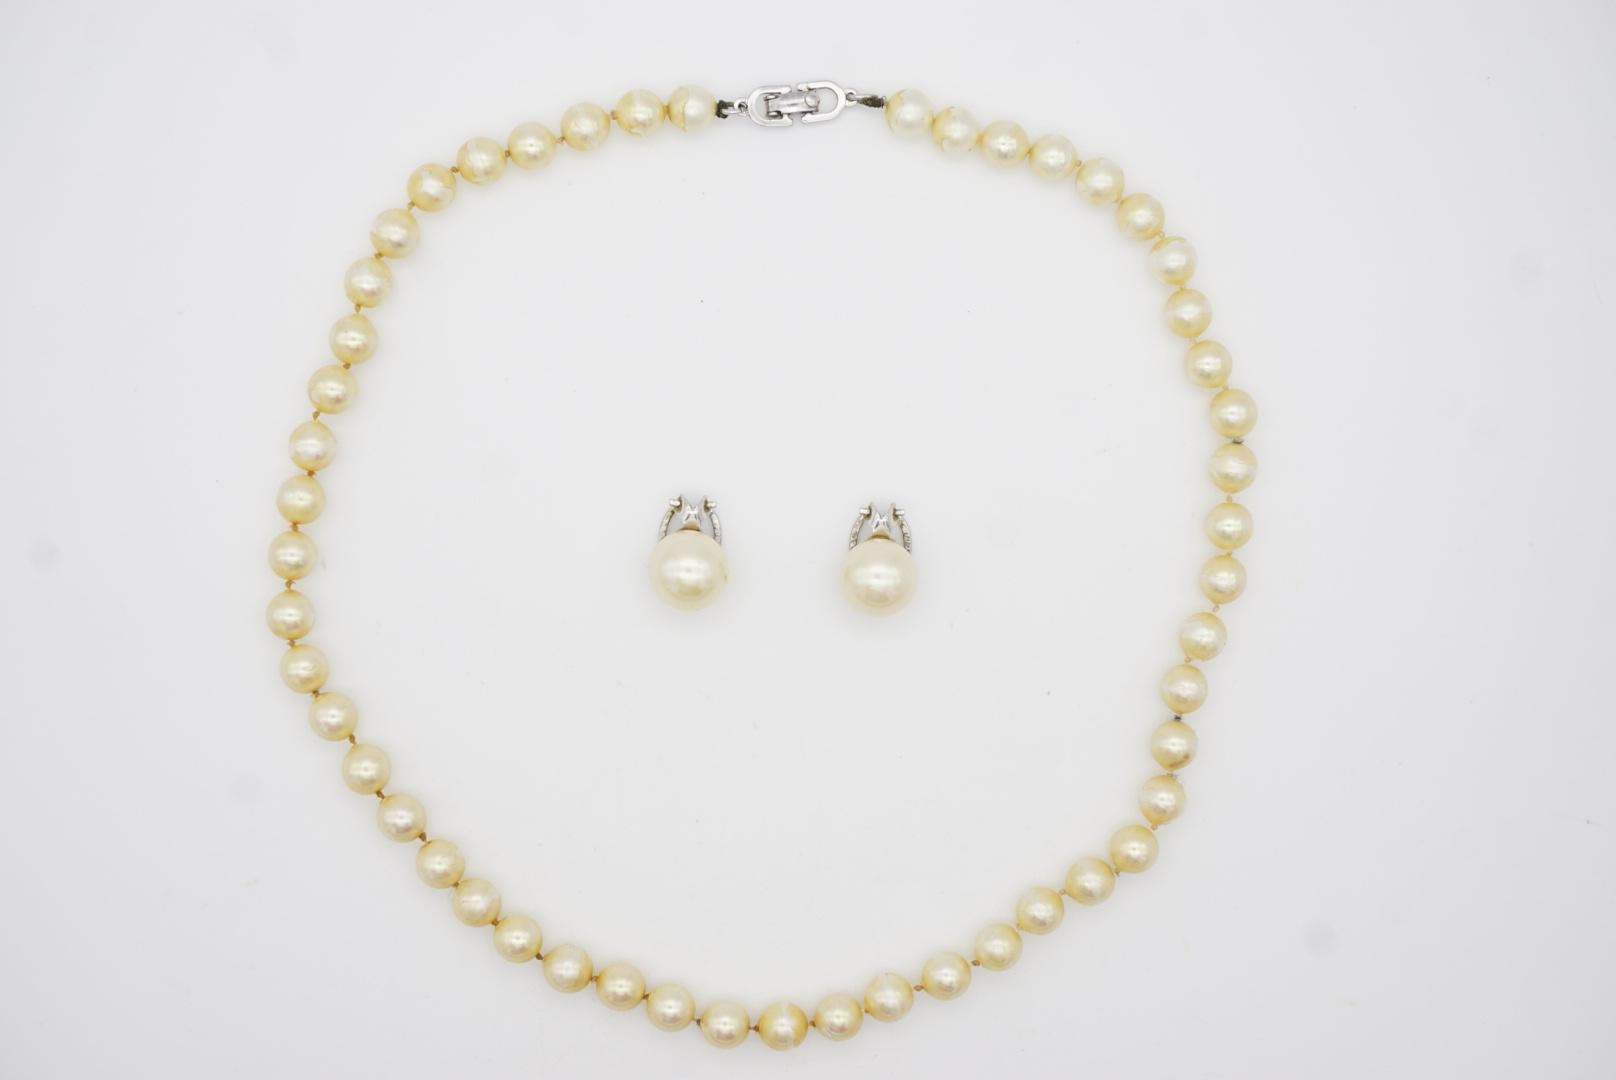 Women's or Men's Christian Dior Vintage 1980s White Round Pearls Set Silver Necklace Earrings For Sale